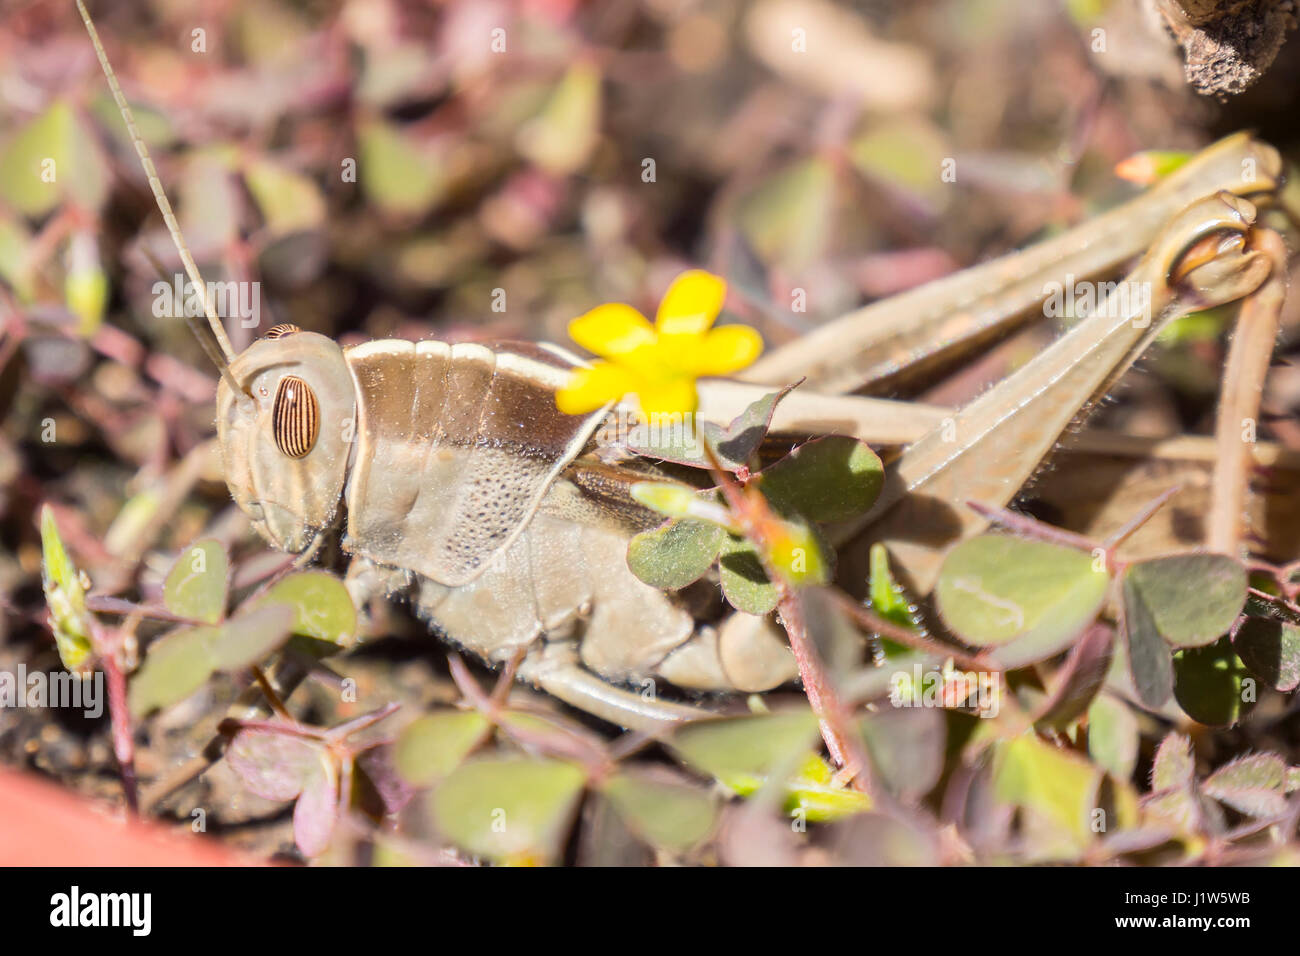 Acanthacris ruficornis grasshopper in the grass Stock Photo